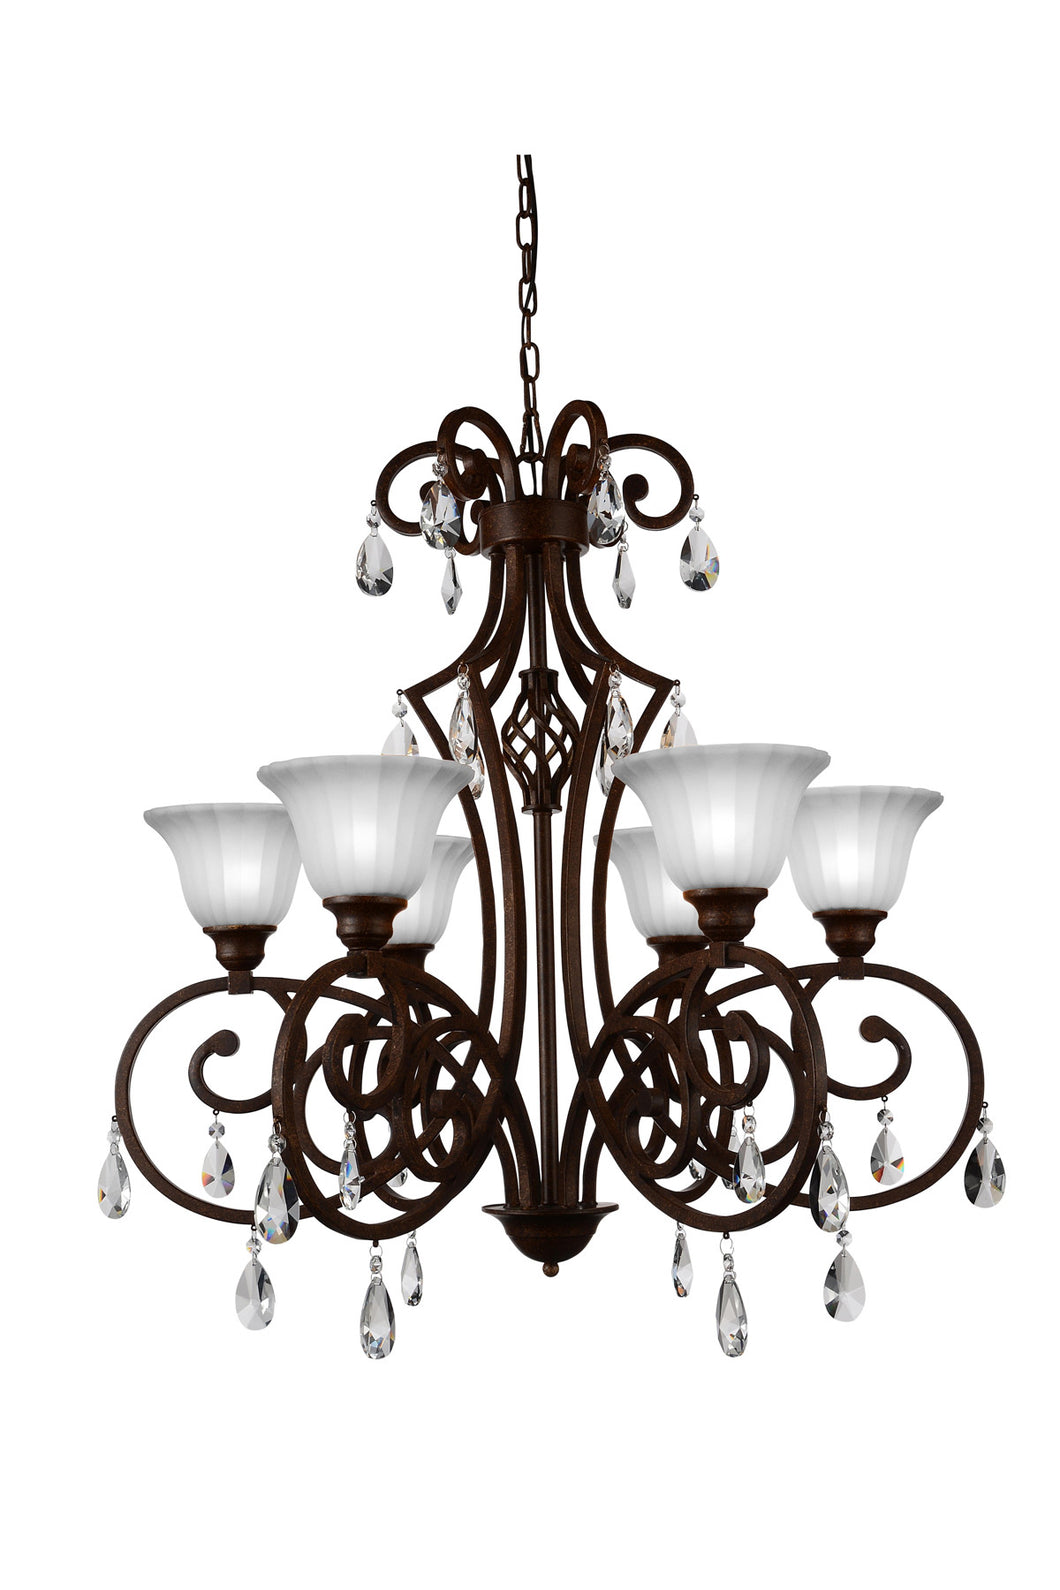 6 Light Candle Chandelier with Dark Bronze finish